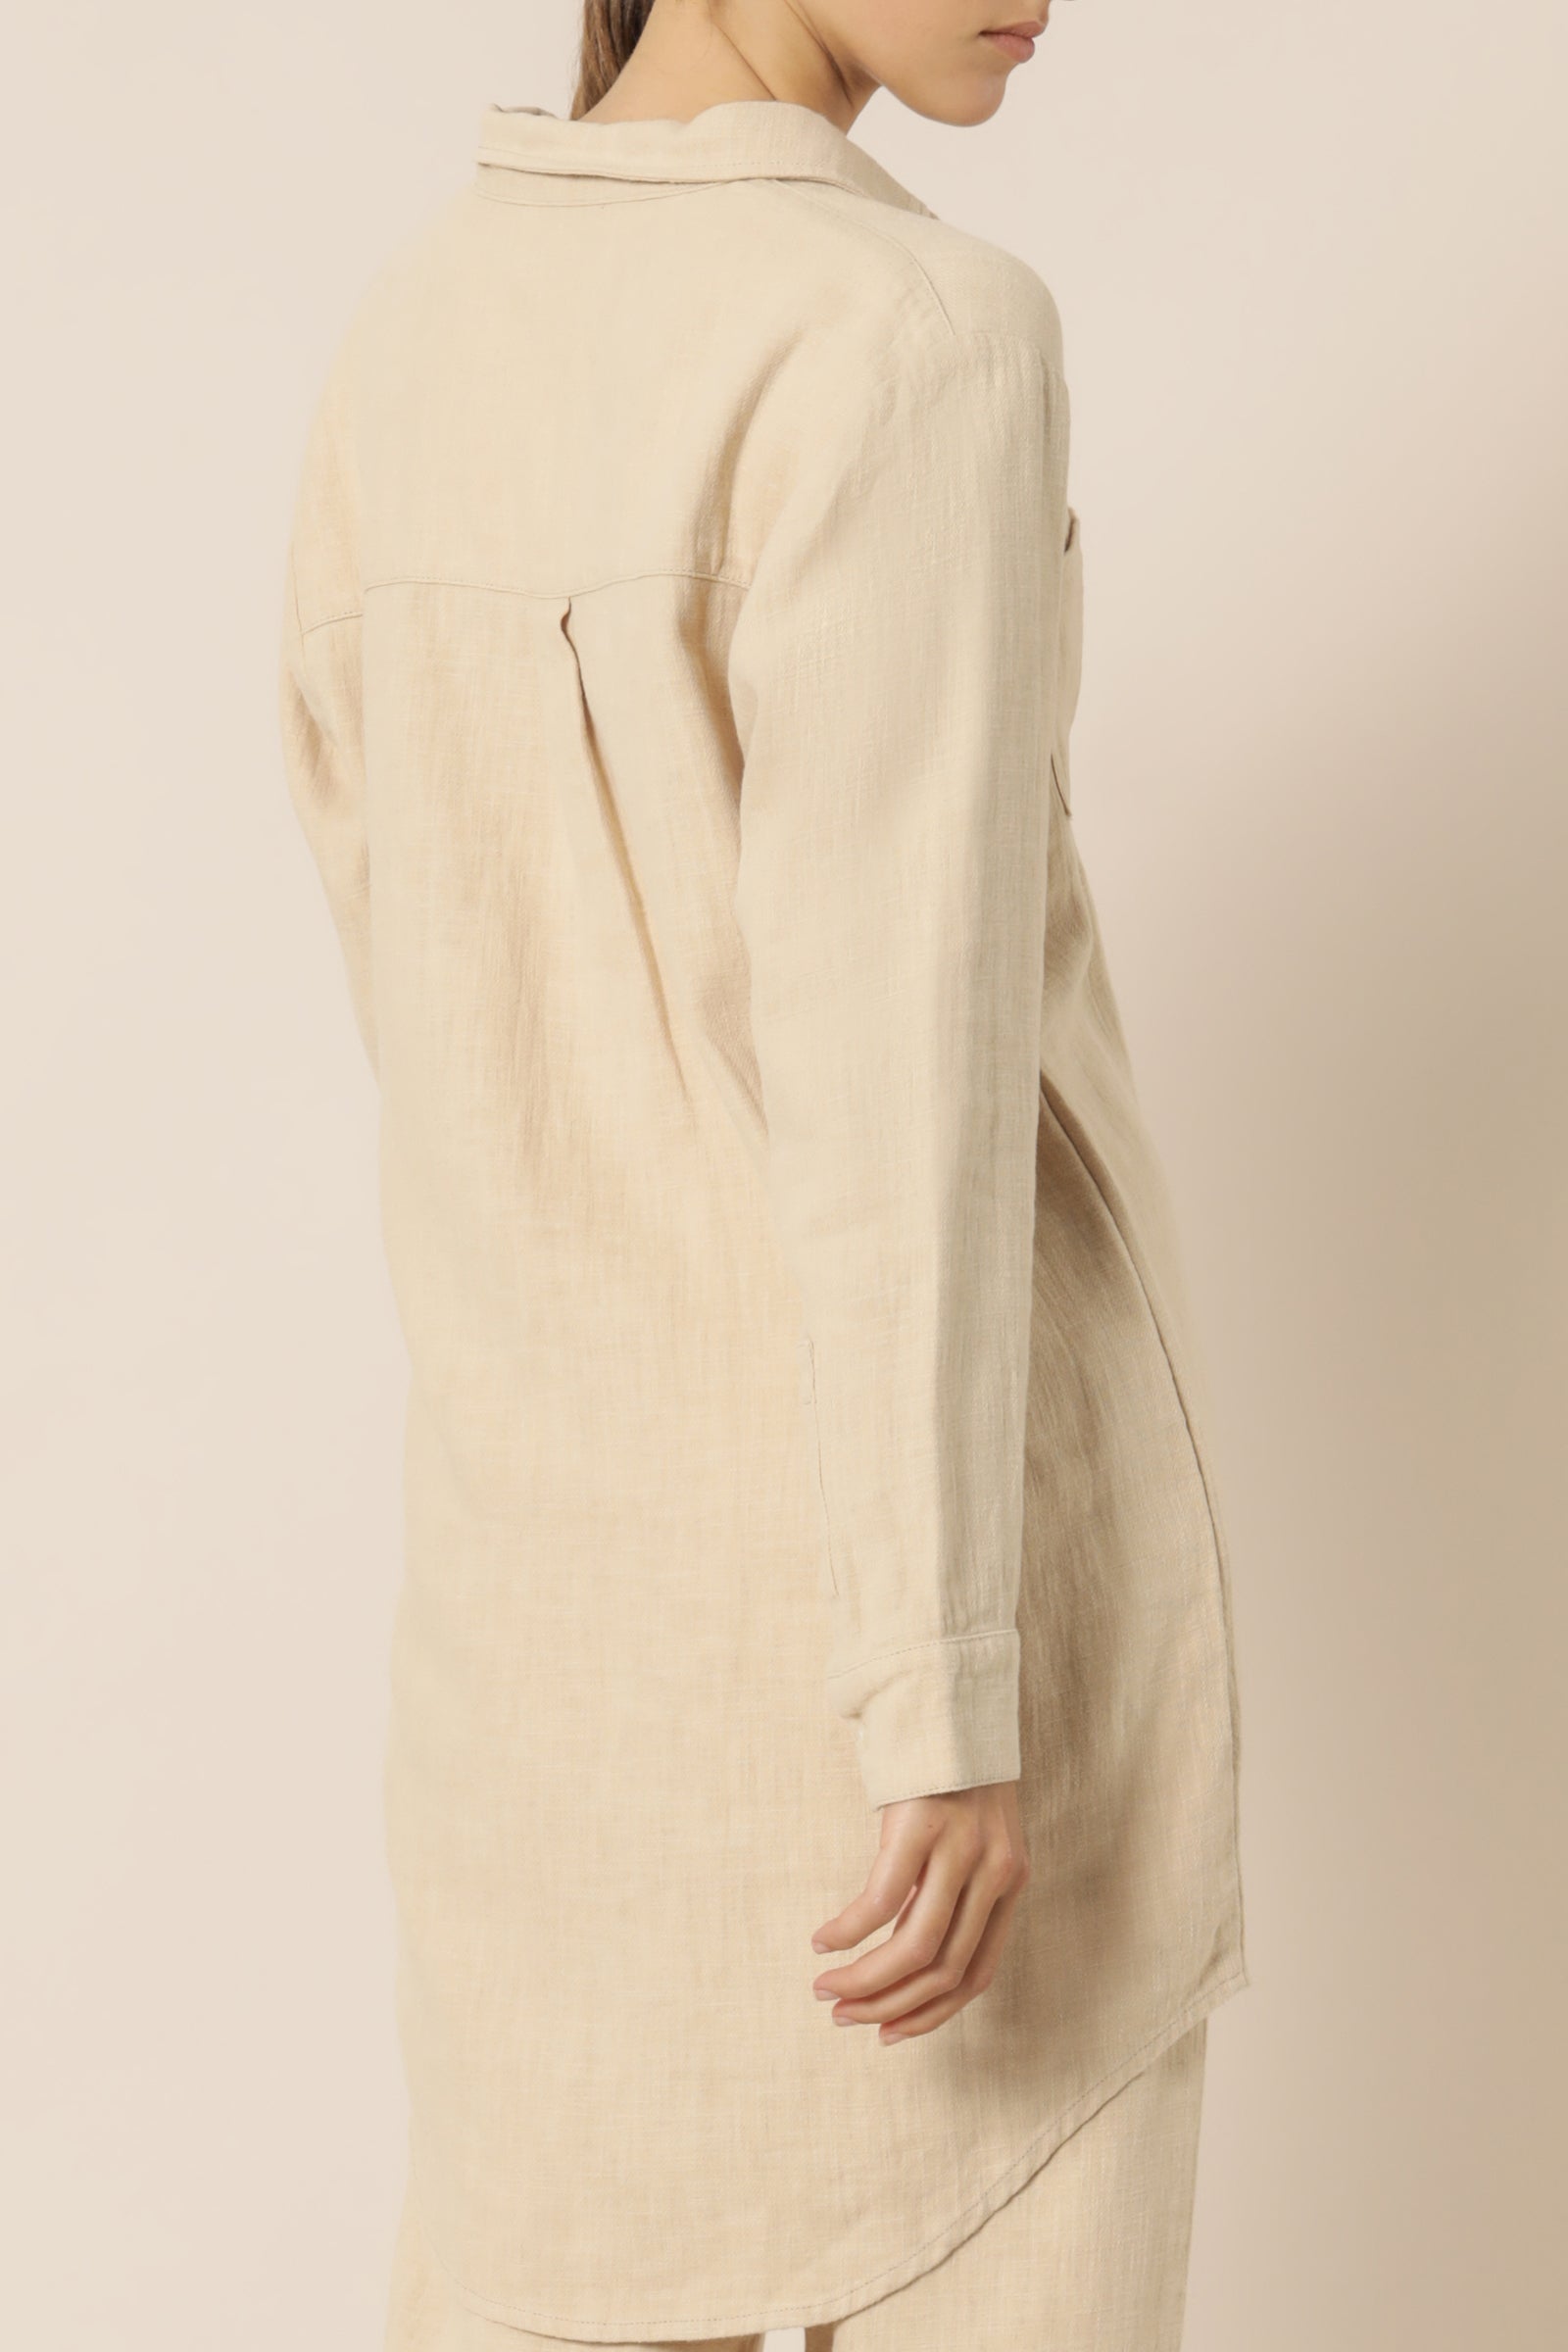 Nude Lucy Marvin Longline Shirt Oat Shirt 